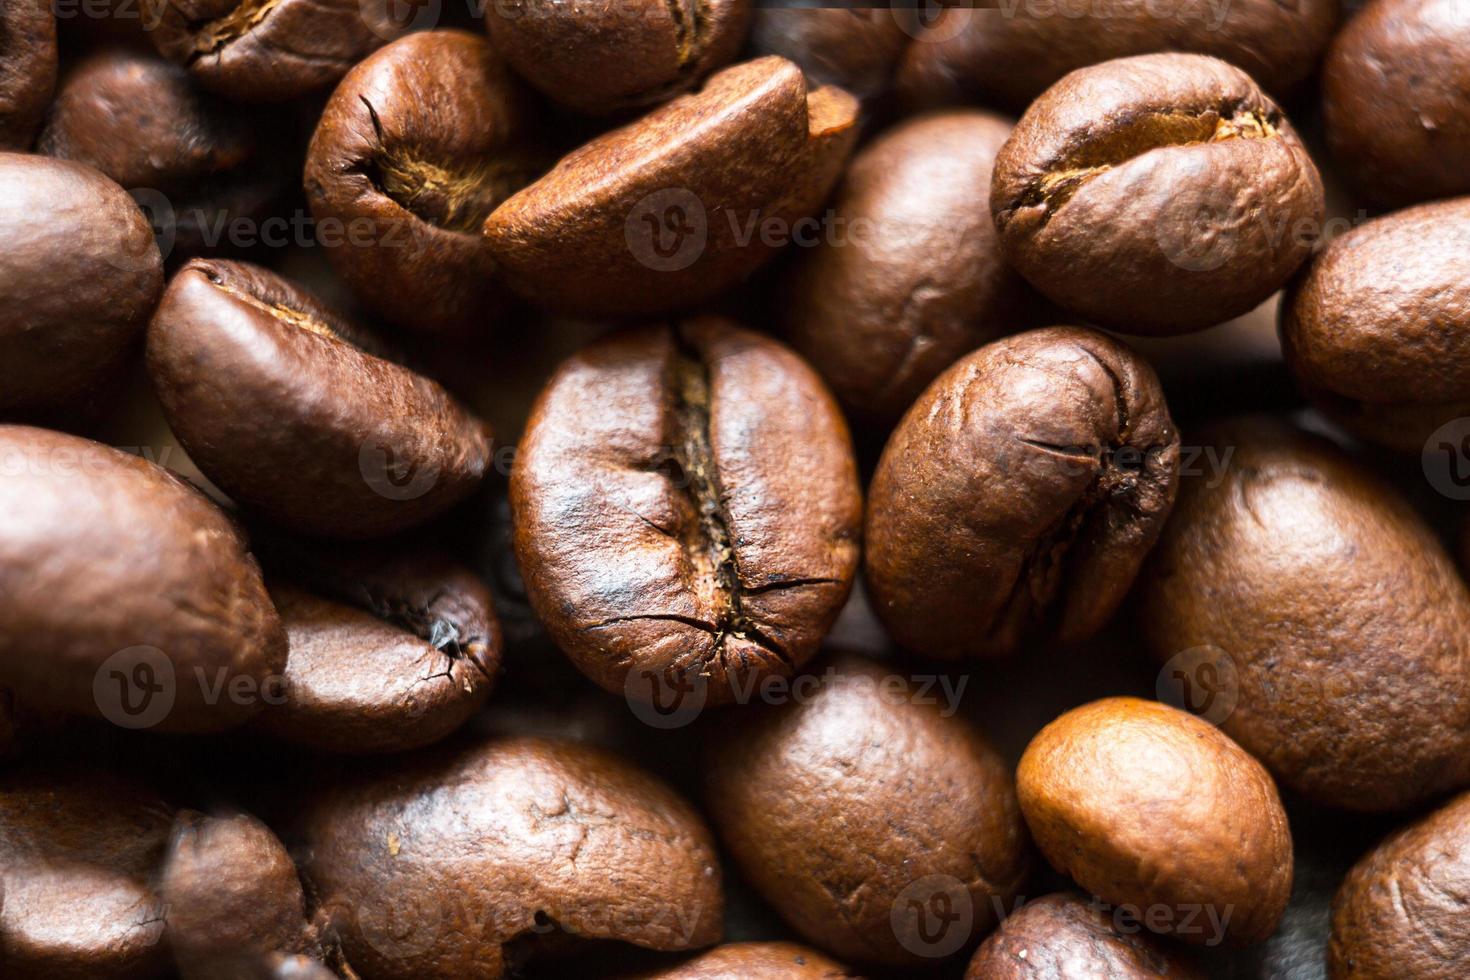 Roasted coffee beans close - up-fragrant background. Brown arabica coffee beans are scattered on the wooden table. Copy space photo